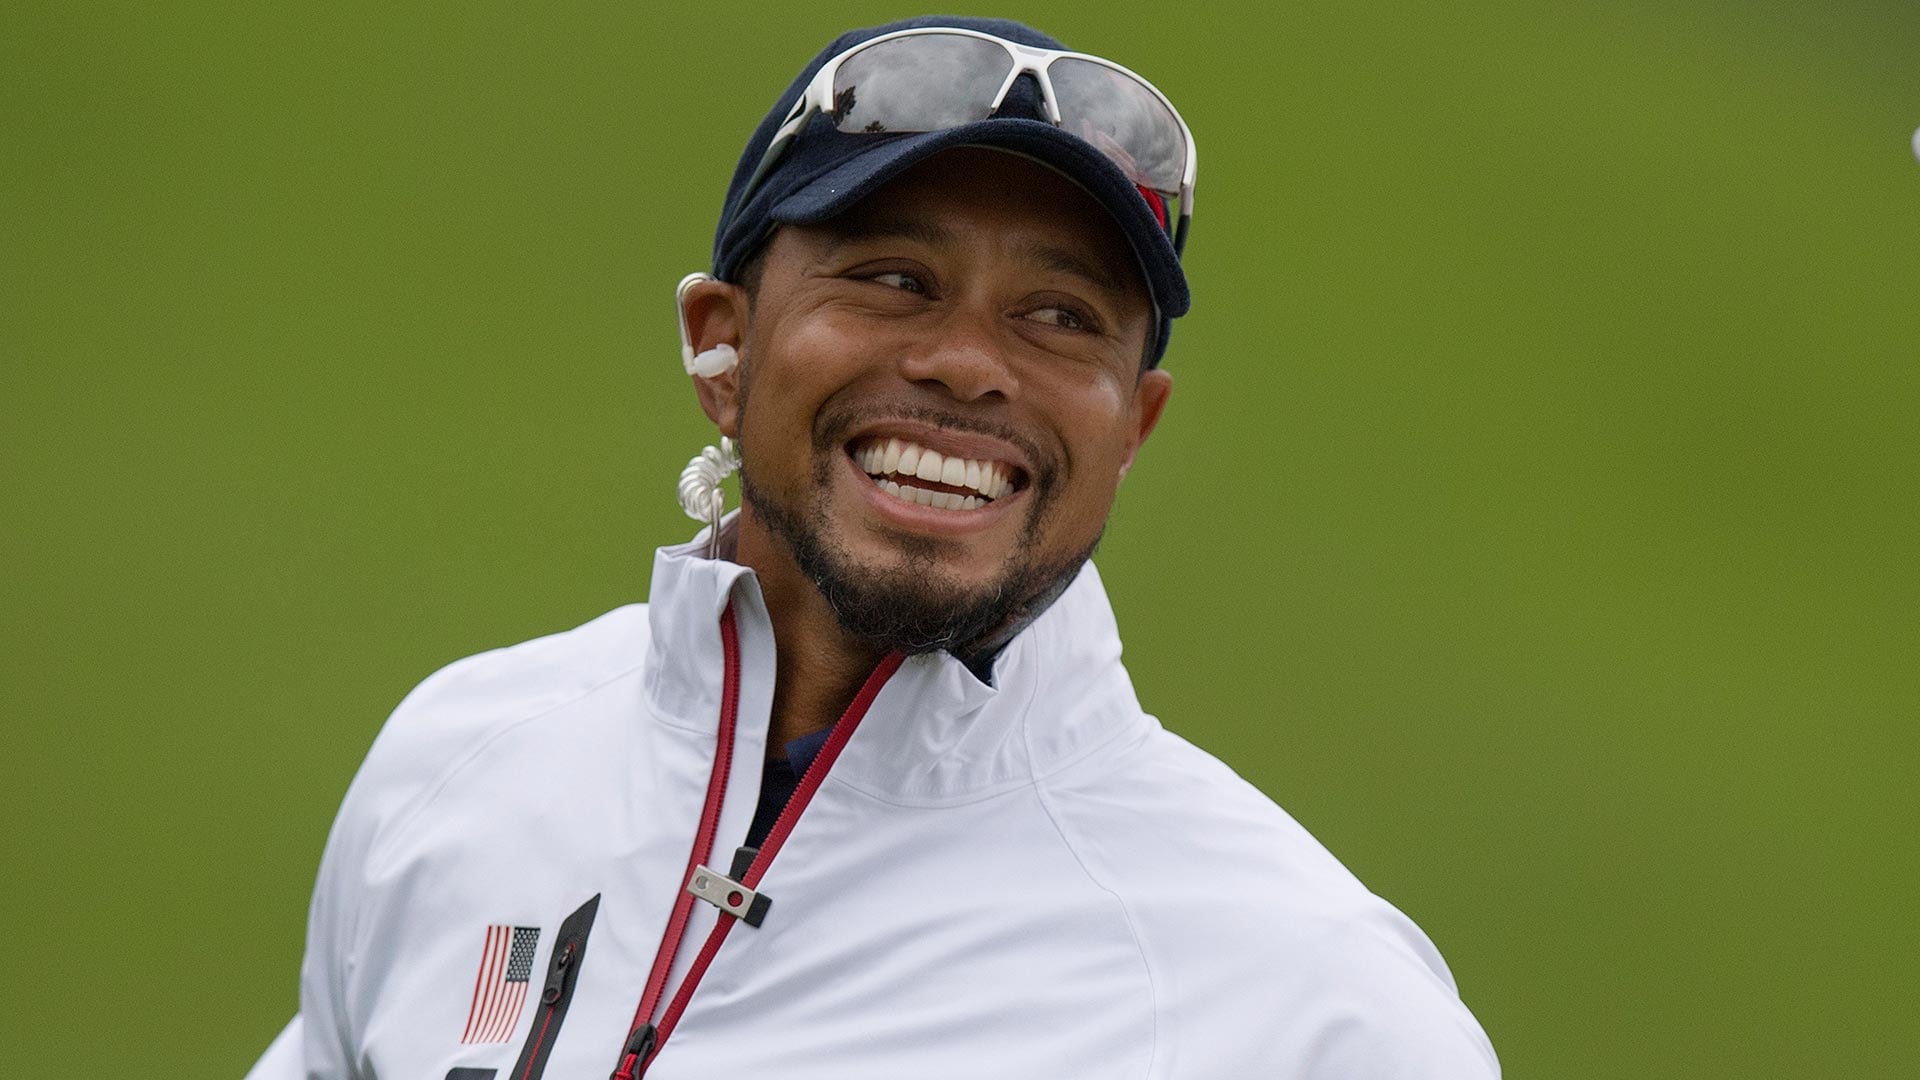 Kevin Na believes Tiger Woods will captain the 2022 U.S. Ryder Cup team